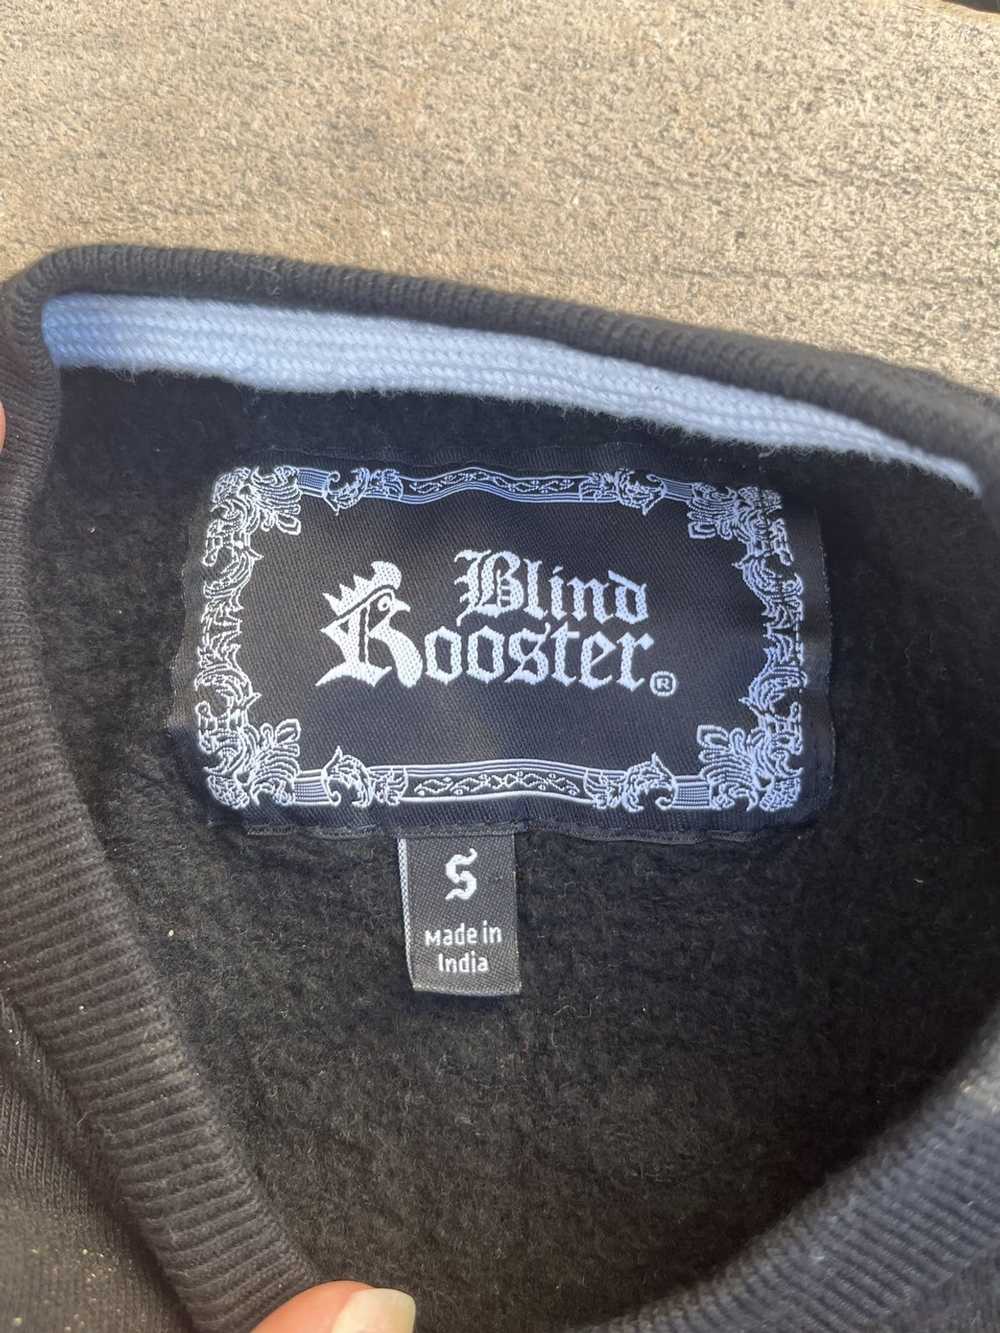 Other × Streetwear Blind Rooster Sweater - image 3